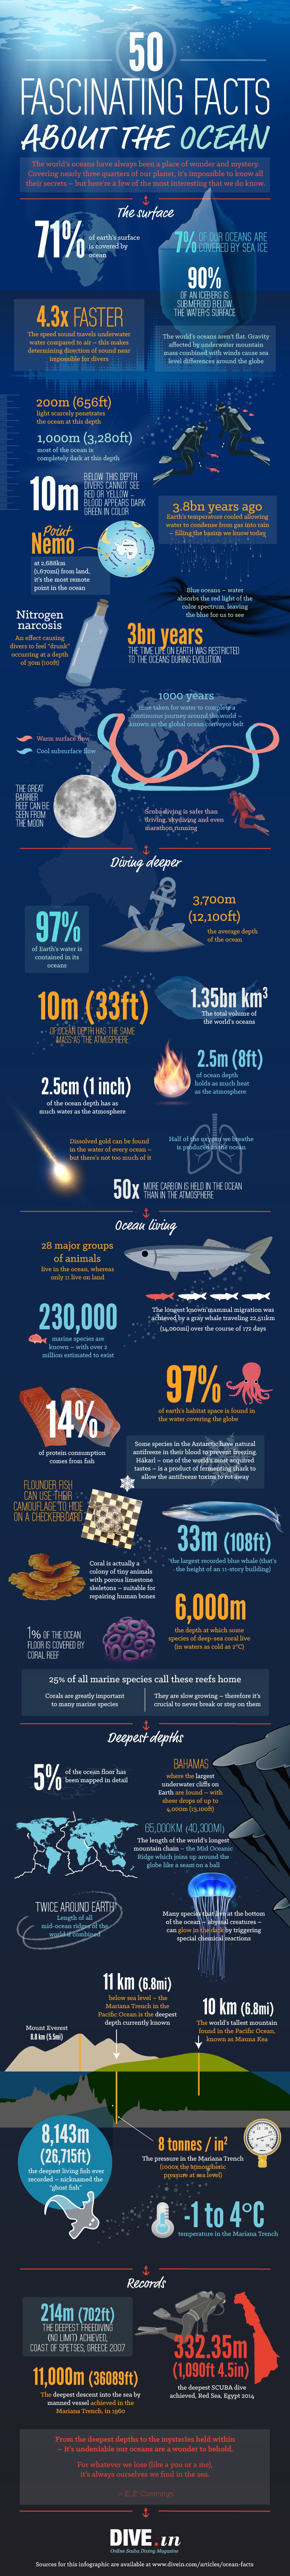 50-fascinating-facts-about-the-ocean.png